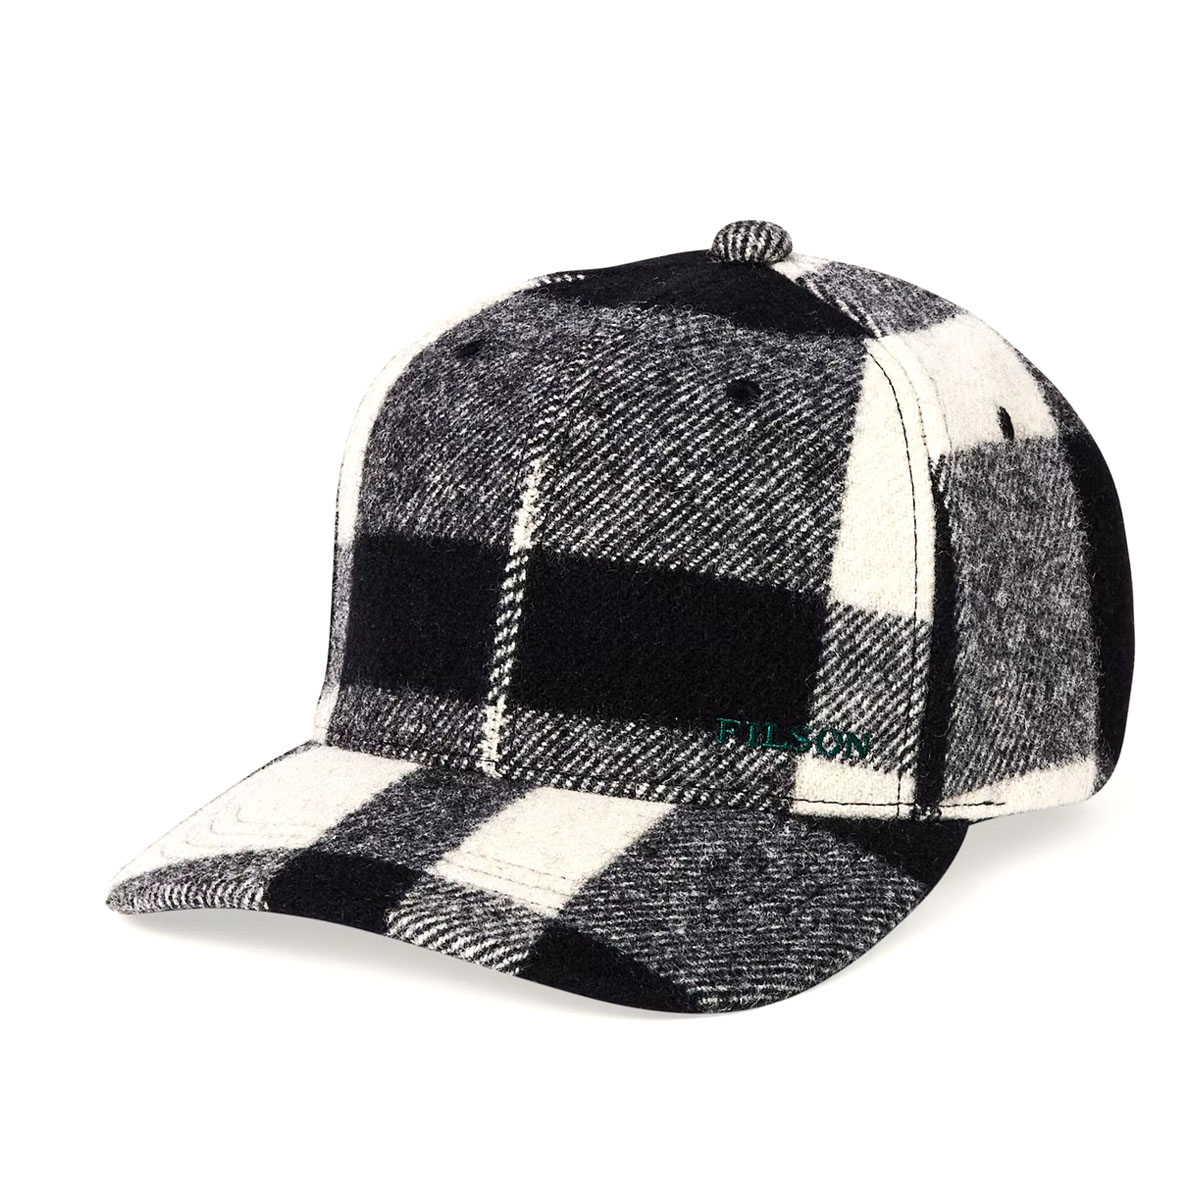 Filson Wool Logger Cap Natural/Black Heritage Plaid, Filson's warmest logger cap, made with weather-resistant Mackinaw Wool